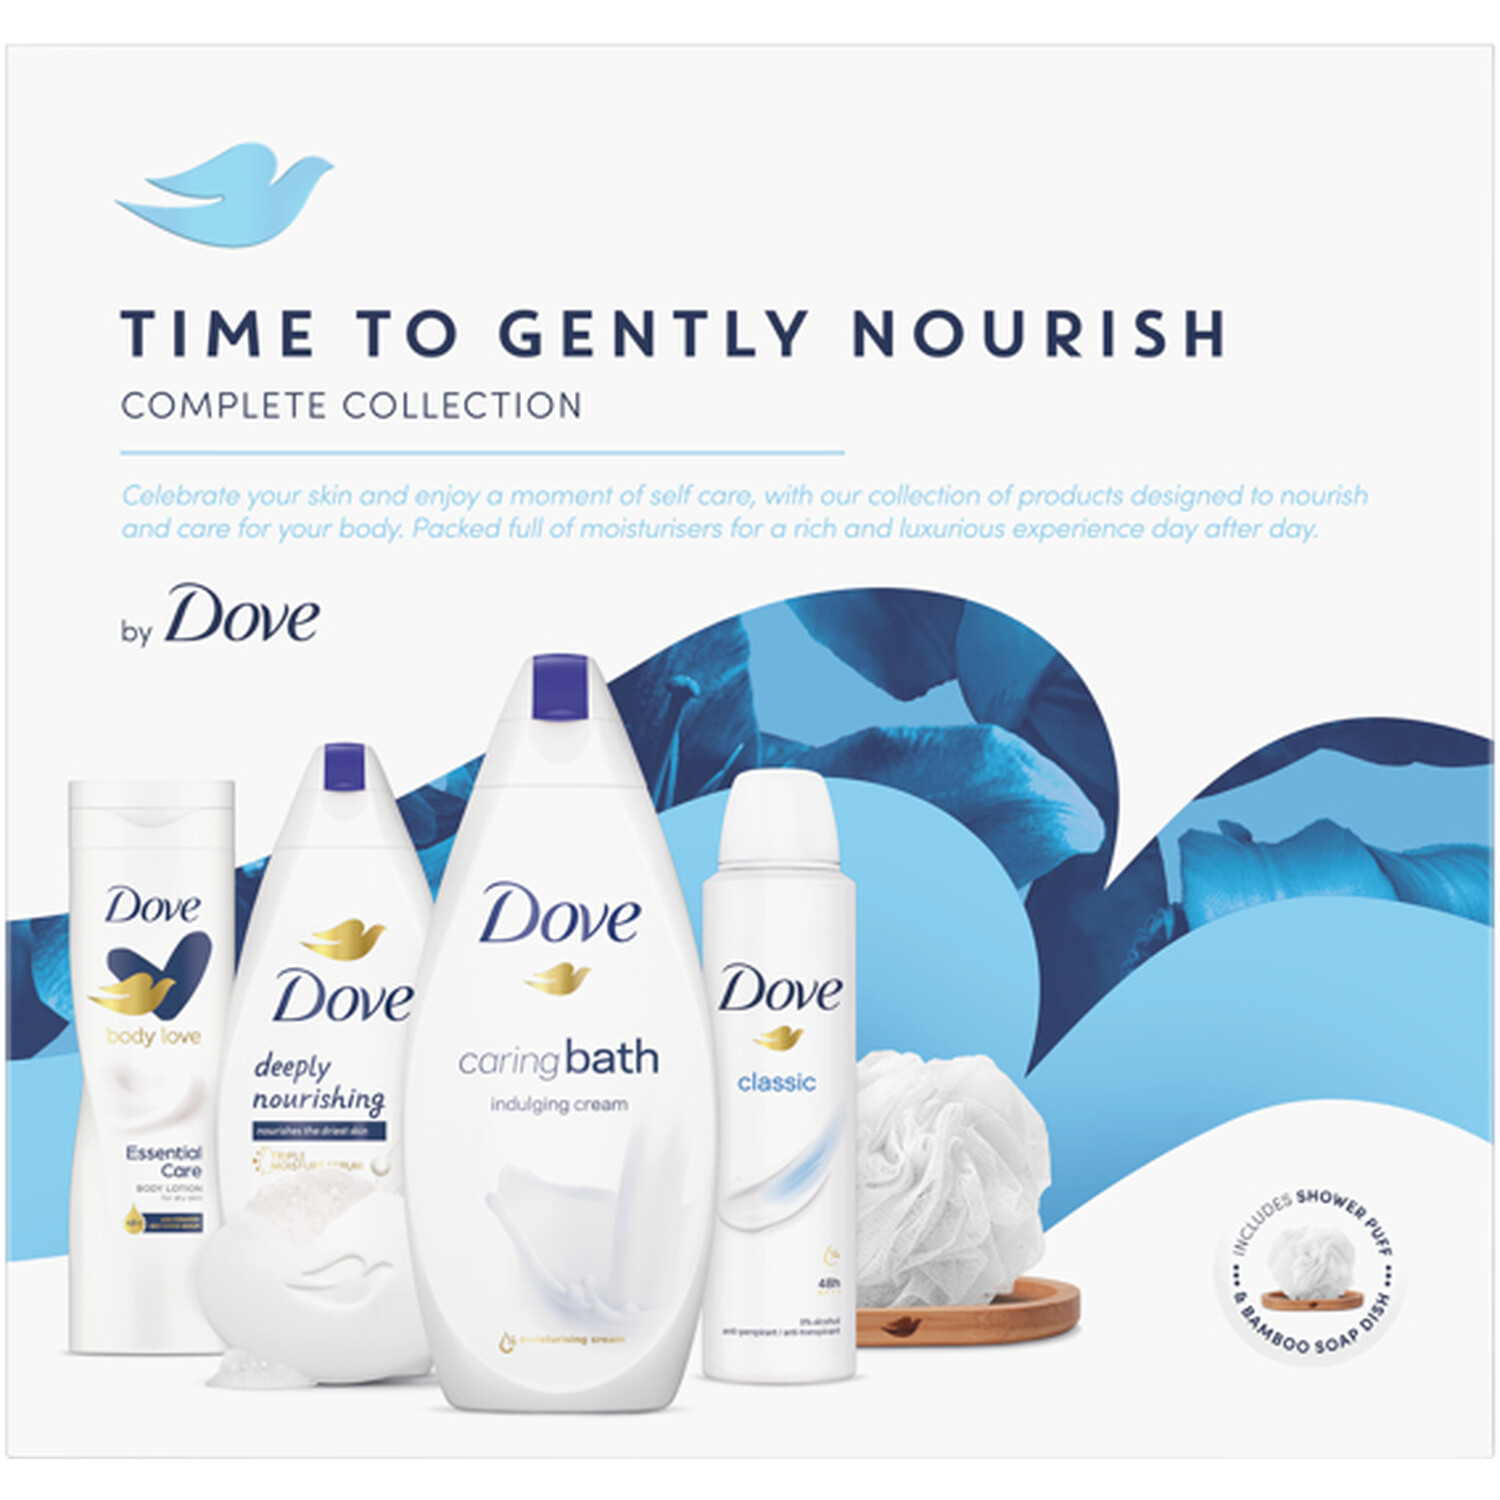 Dove Time to Gently Nourish Gift Set - White Image